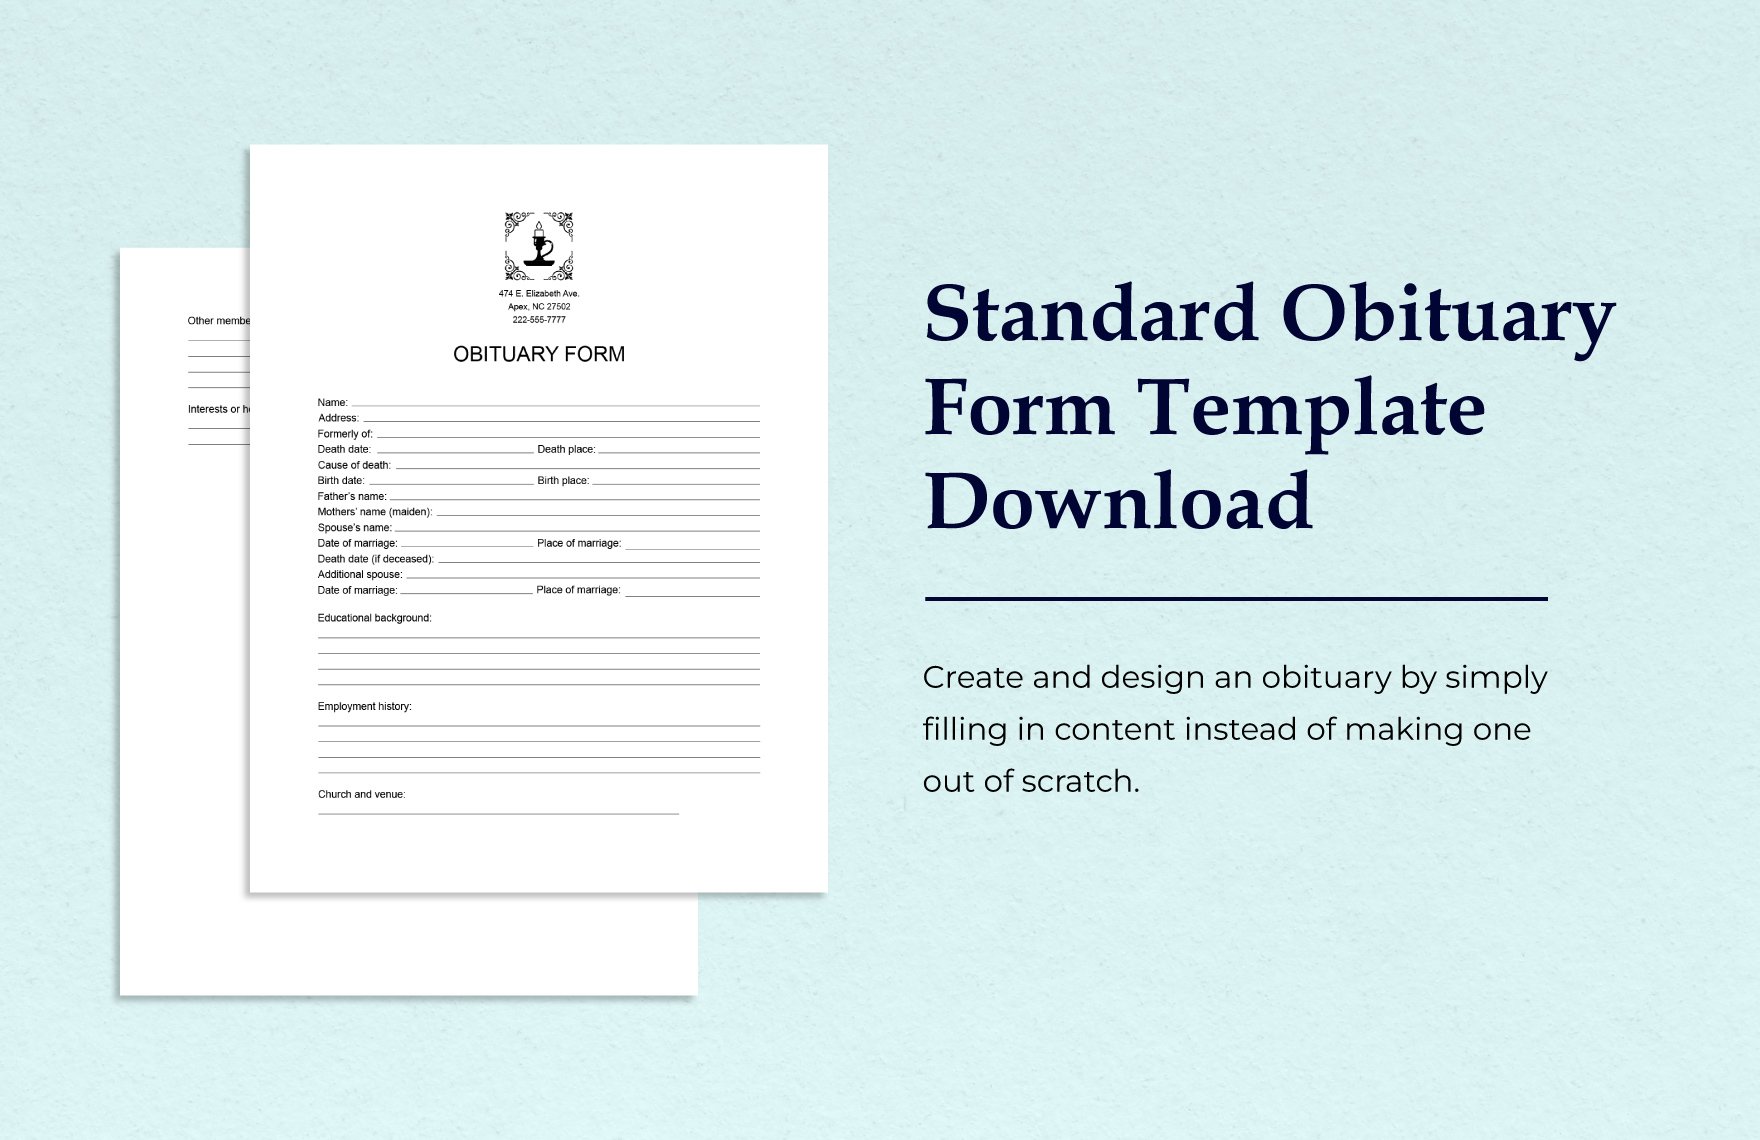 Standard Obituary Form Template Download